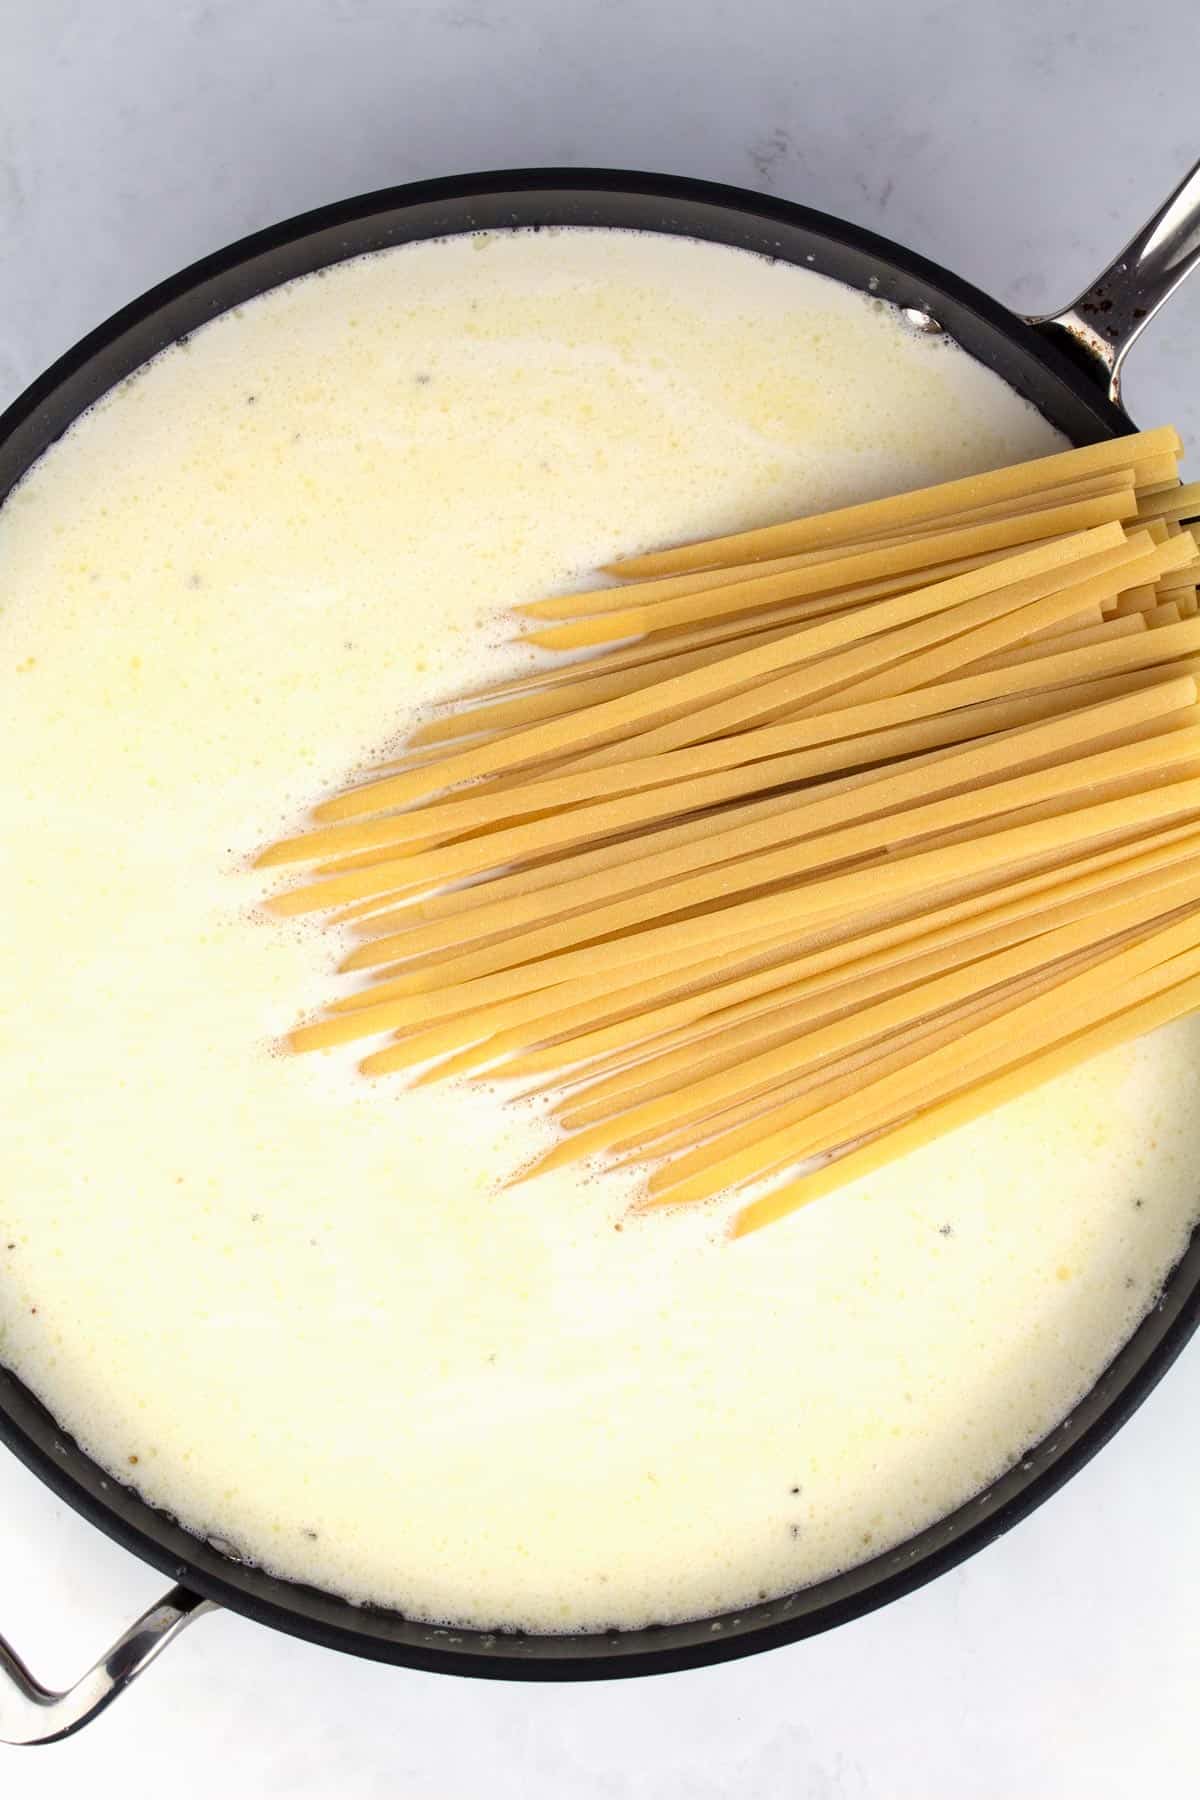 Raw fettuccine noodles sticking out of a skillet filled with cream.